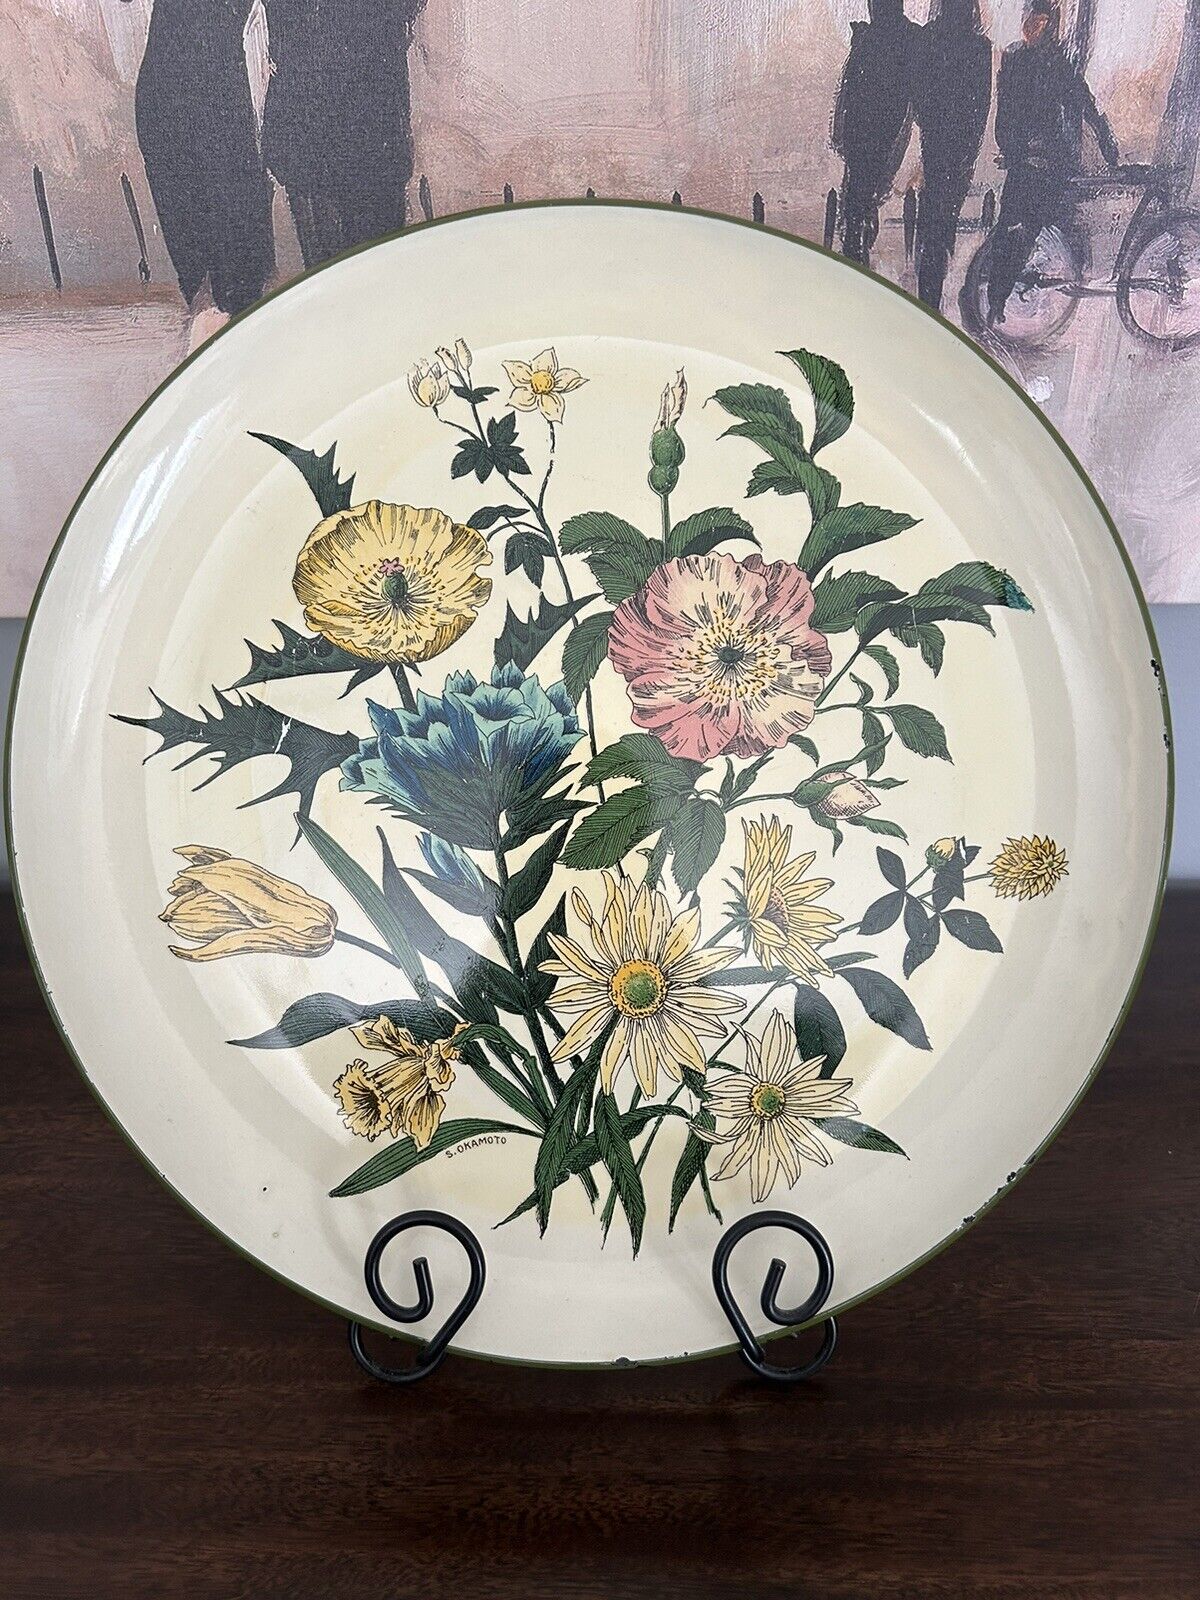 Vintage Floral Serving Tray Floral Lacquer ware 13 inch